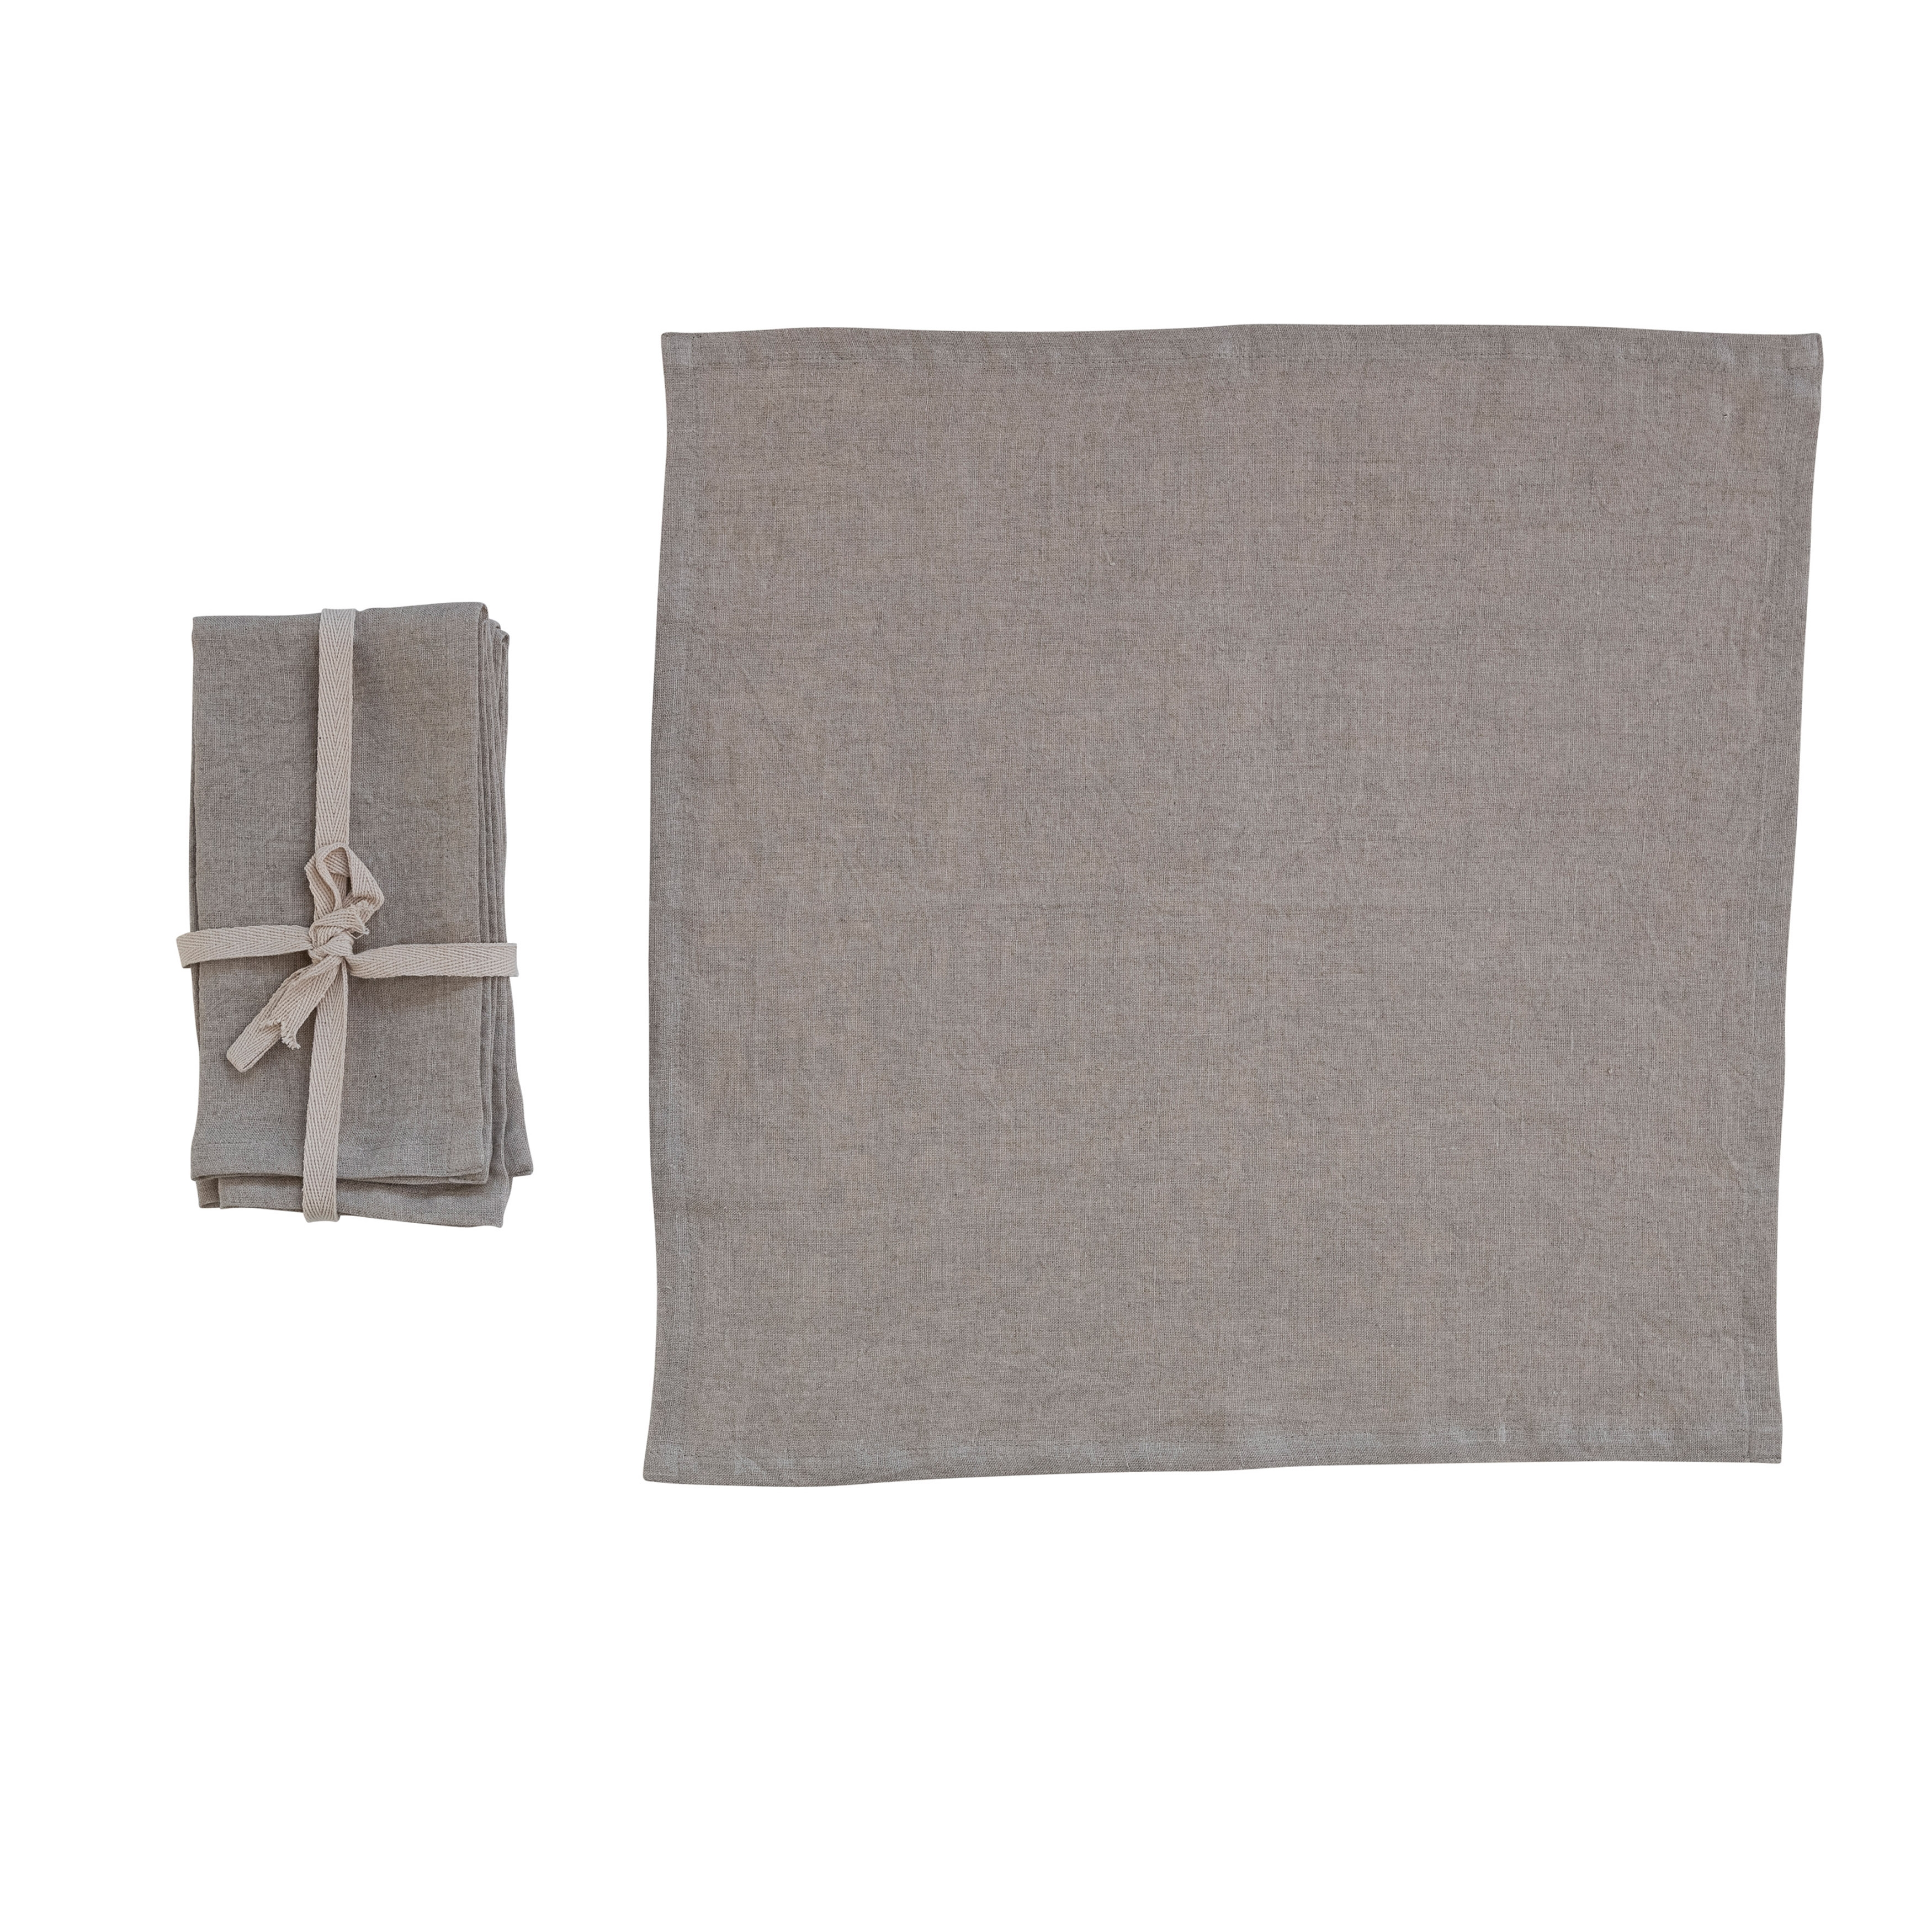 18 Inches Square Stonewashed Linen Dinner Napkins for Kitchen Use, Natural Color, Set of 4 - Image 0